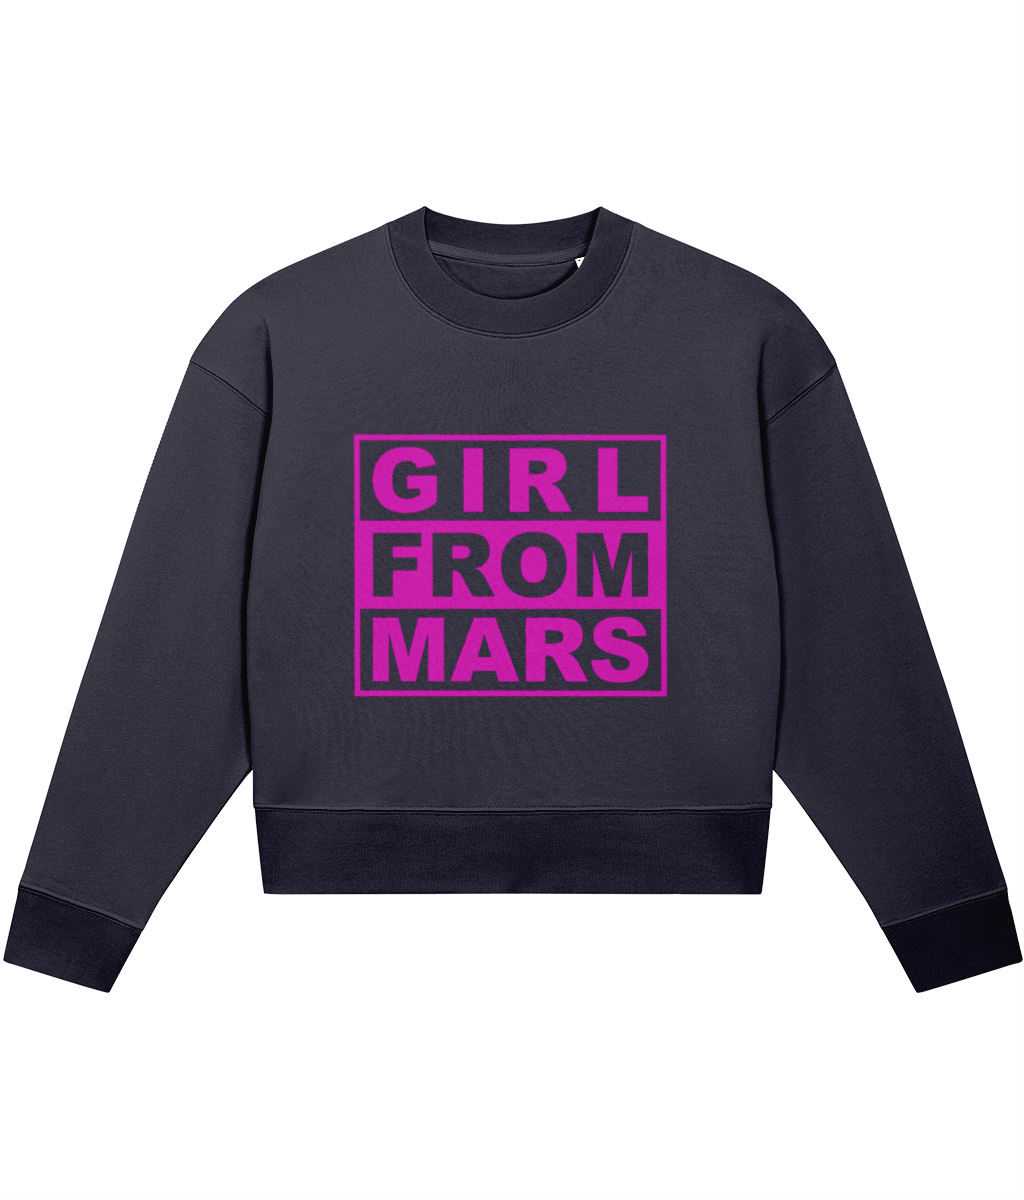 GIRLfromMARS© ORGANIC GALACTIC GYM CROPSTER